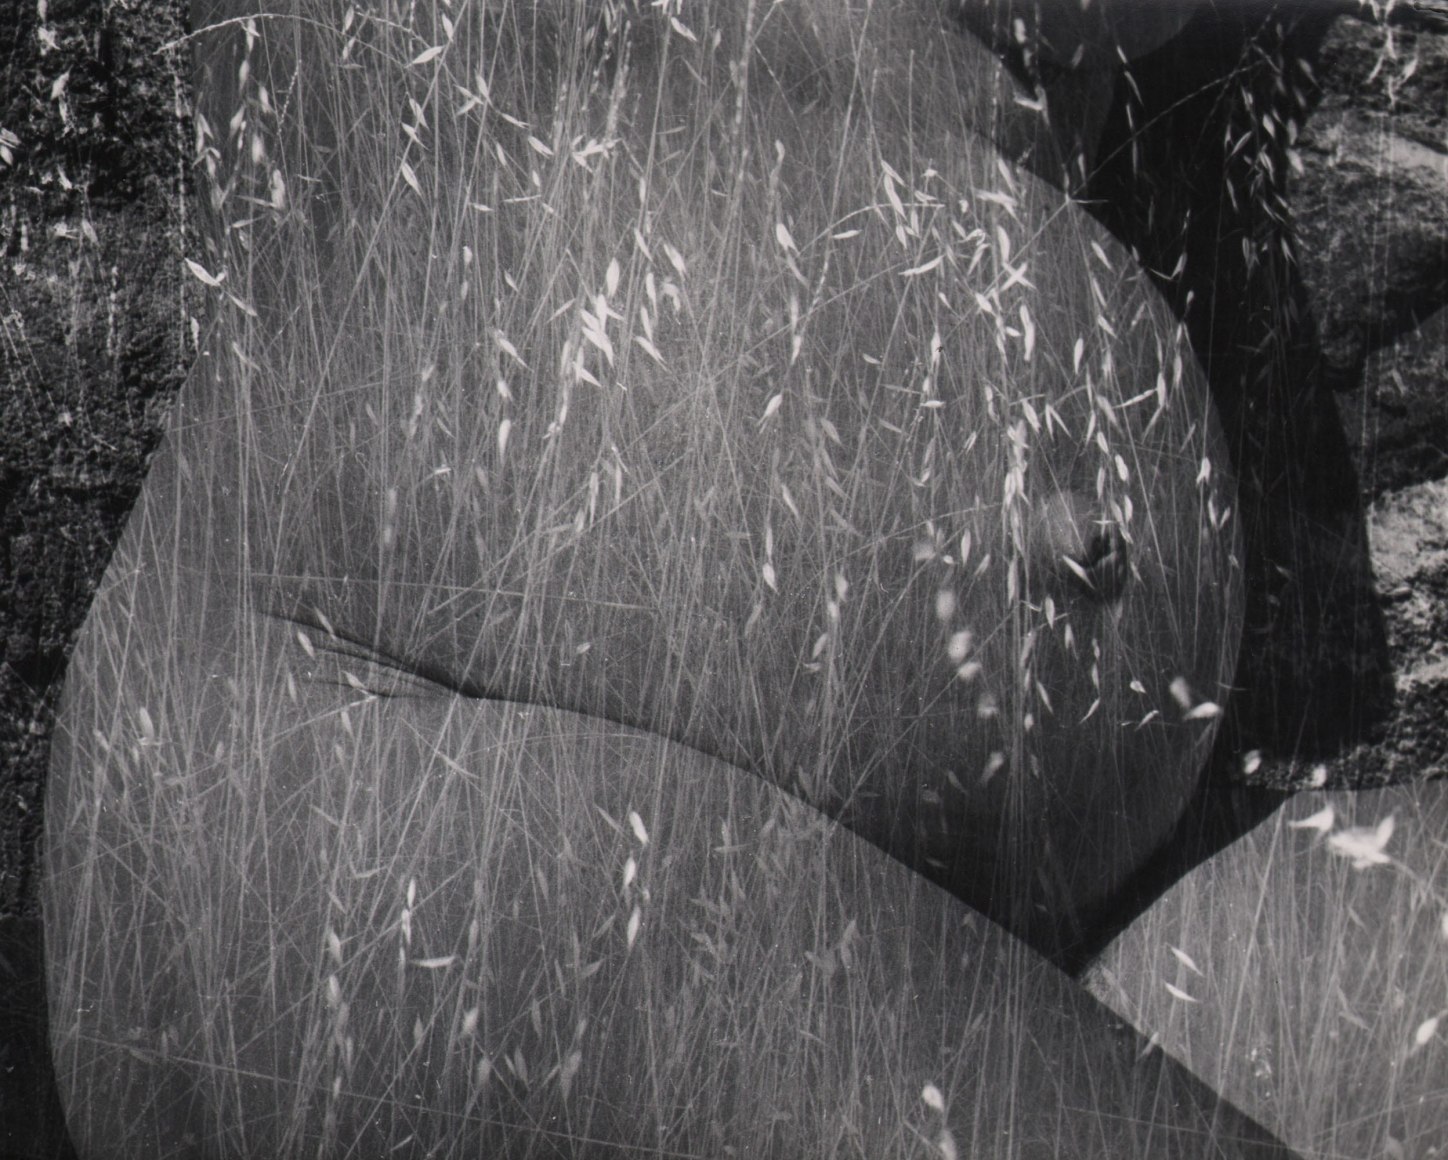 Ruth Bernhard, Harvest, ​1953. A woman's pregnant belly superimposed with wheat-like grasses.